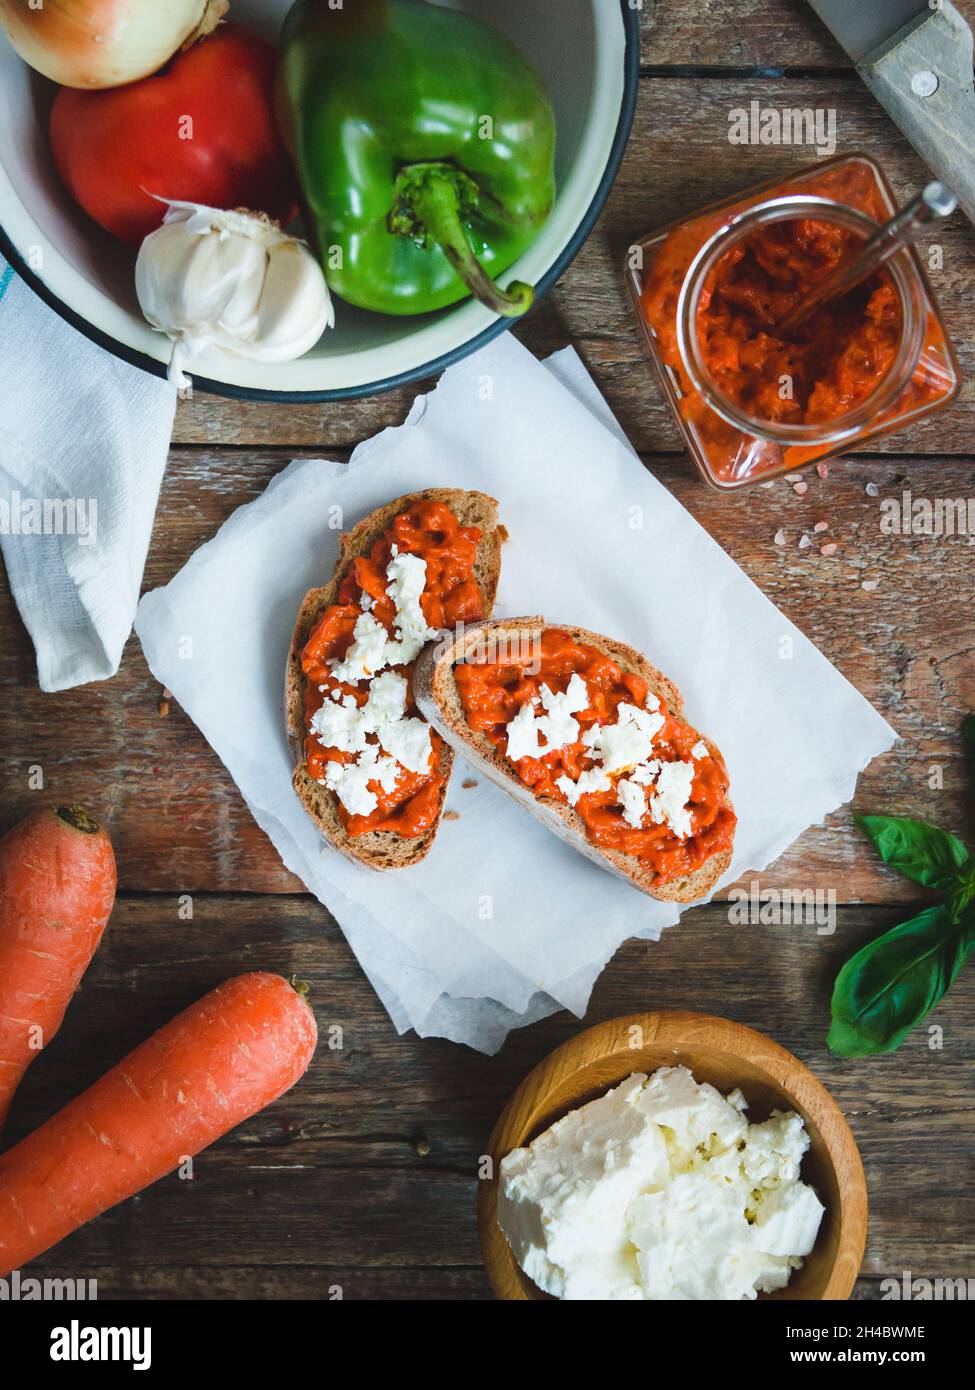 Wholegrain bread covered with tomato-pepper dip and feta cheese over old rustic wooden table. Homemade organic vegetable dish. Stock Photo